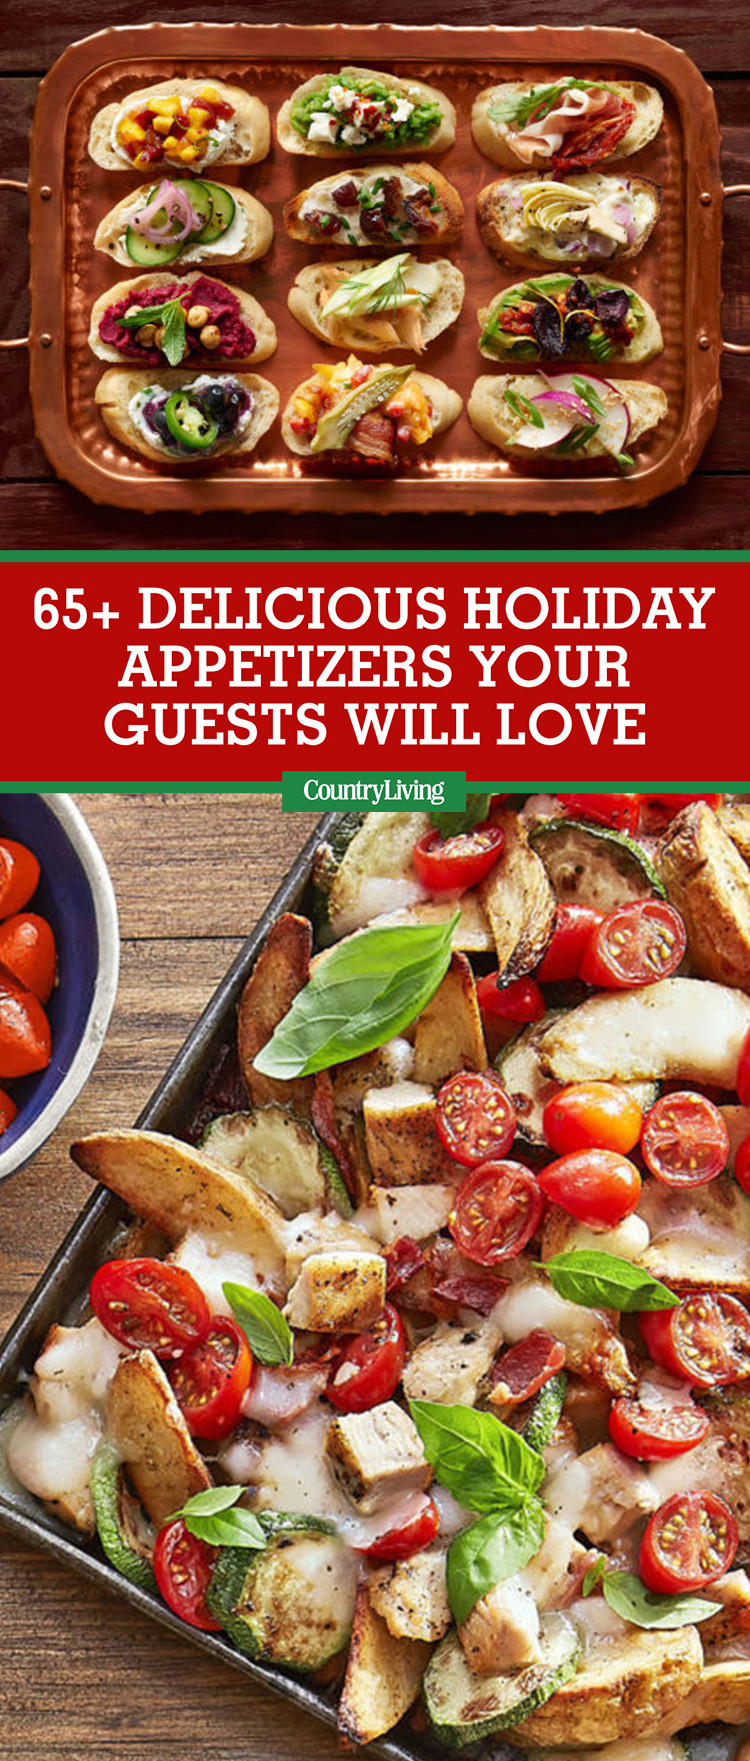 Recipes For Christmas Appetizers
 60 Easy Thanksgiving and Christmas Appetizer Recipes